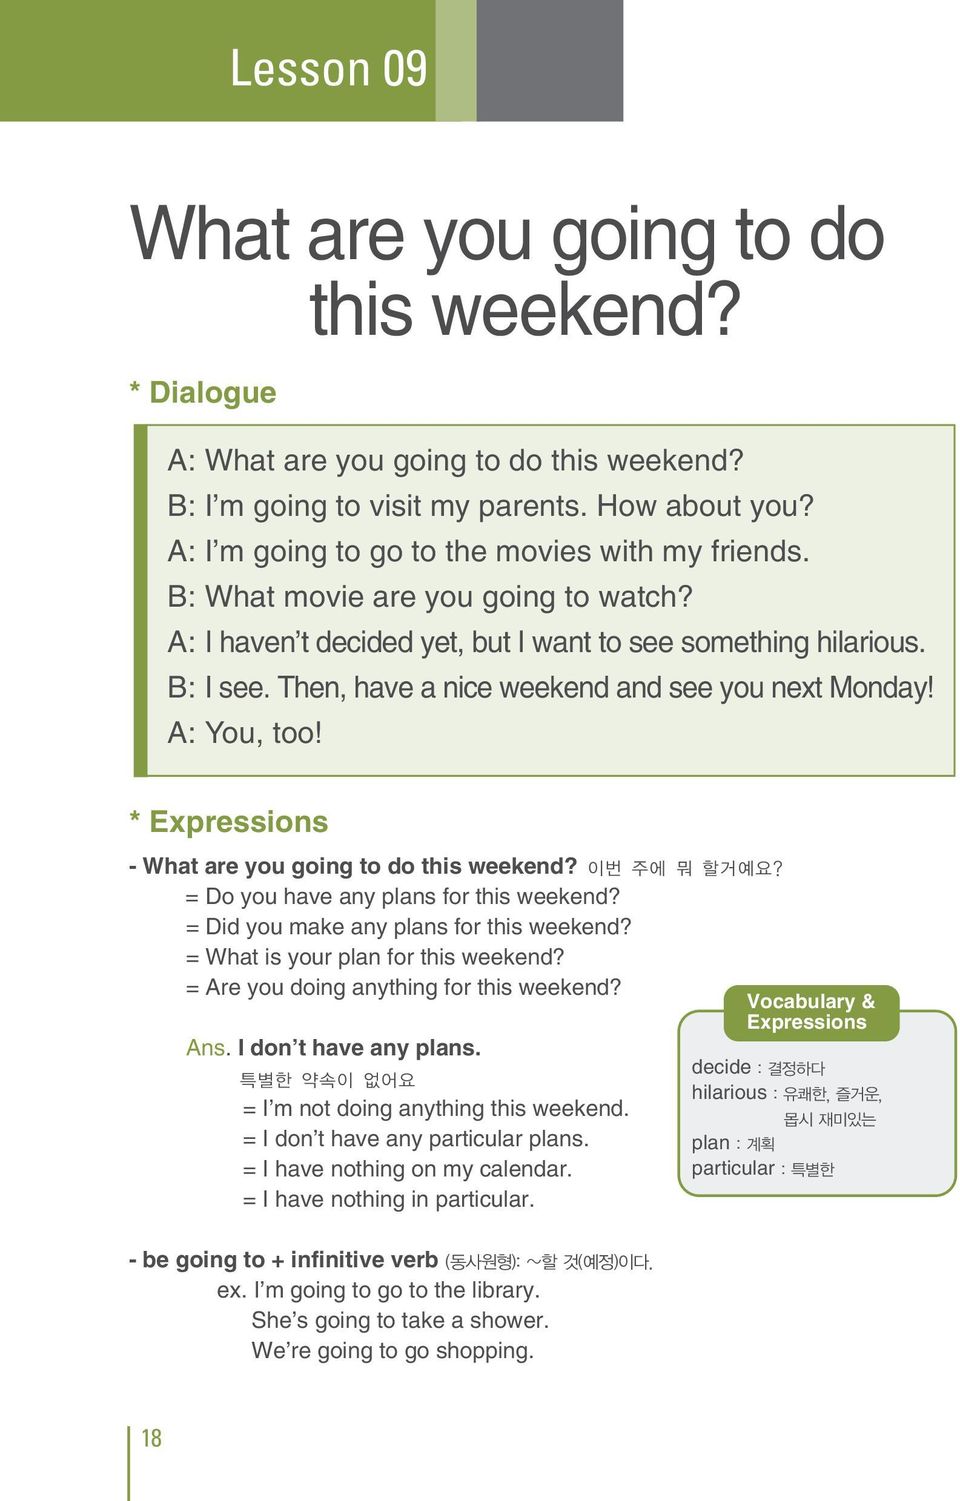 * Expressions - What are you going to do this weekend? = Do you have any plans for this weekend? = Did you make any plans for this weekend? = What is your plan for this weekend?